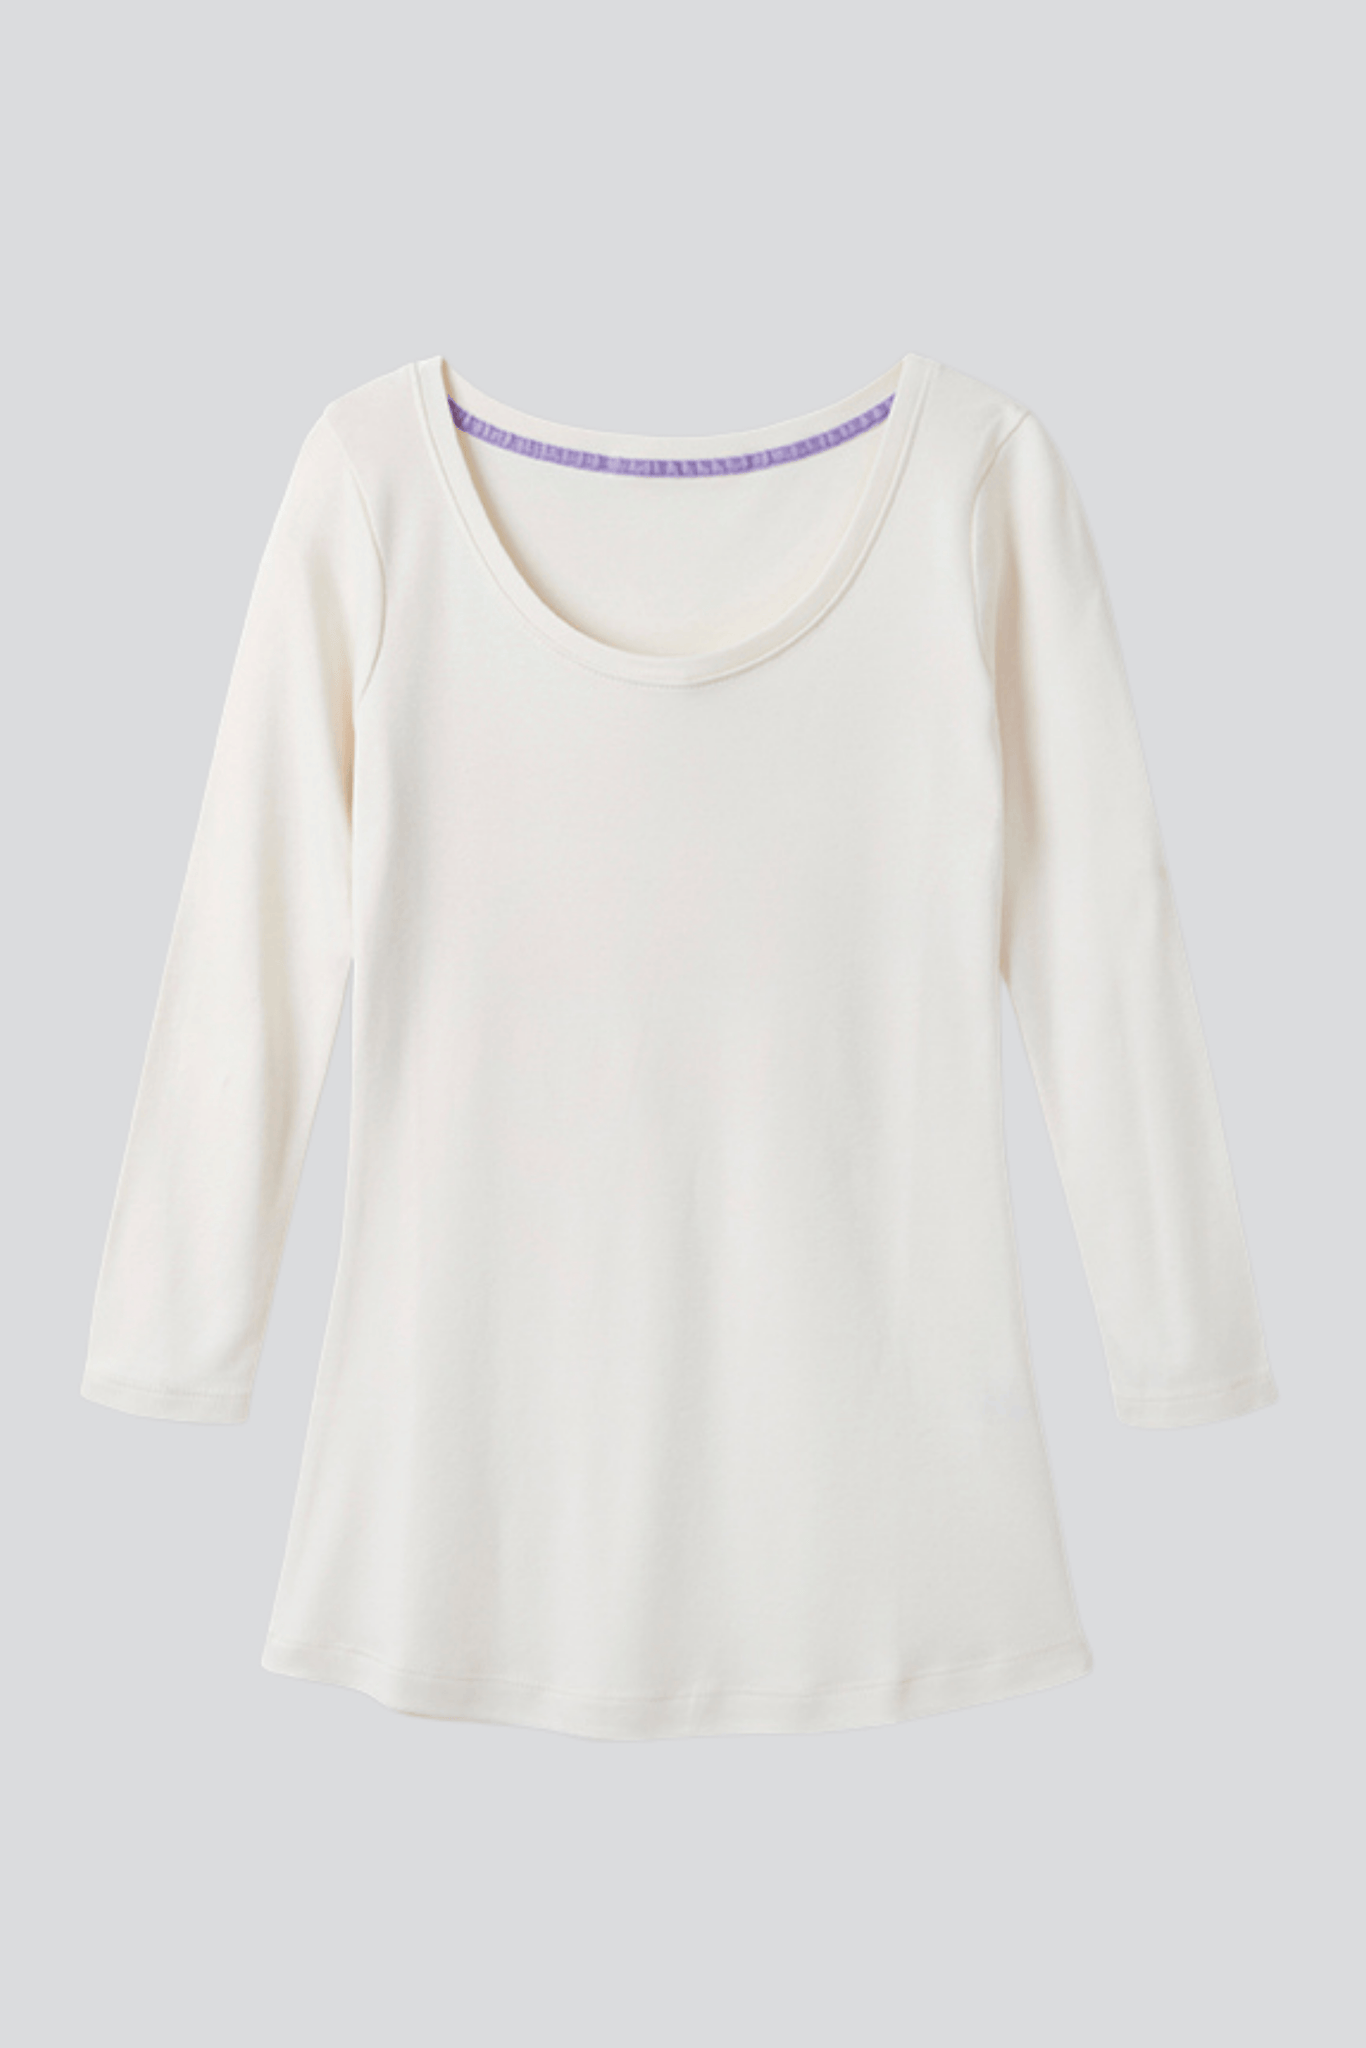 Women's Quality Cotton Jersey cream  3/4 Sleeve Scoop Neck T-Shirt in Cream by Lavender Hill Clothing 